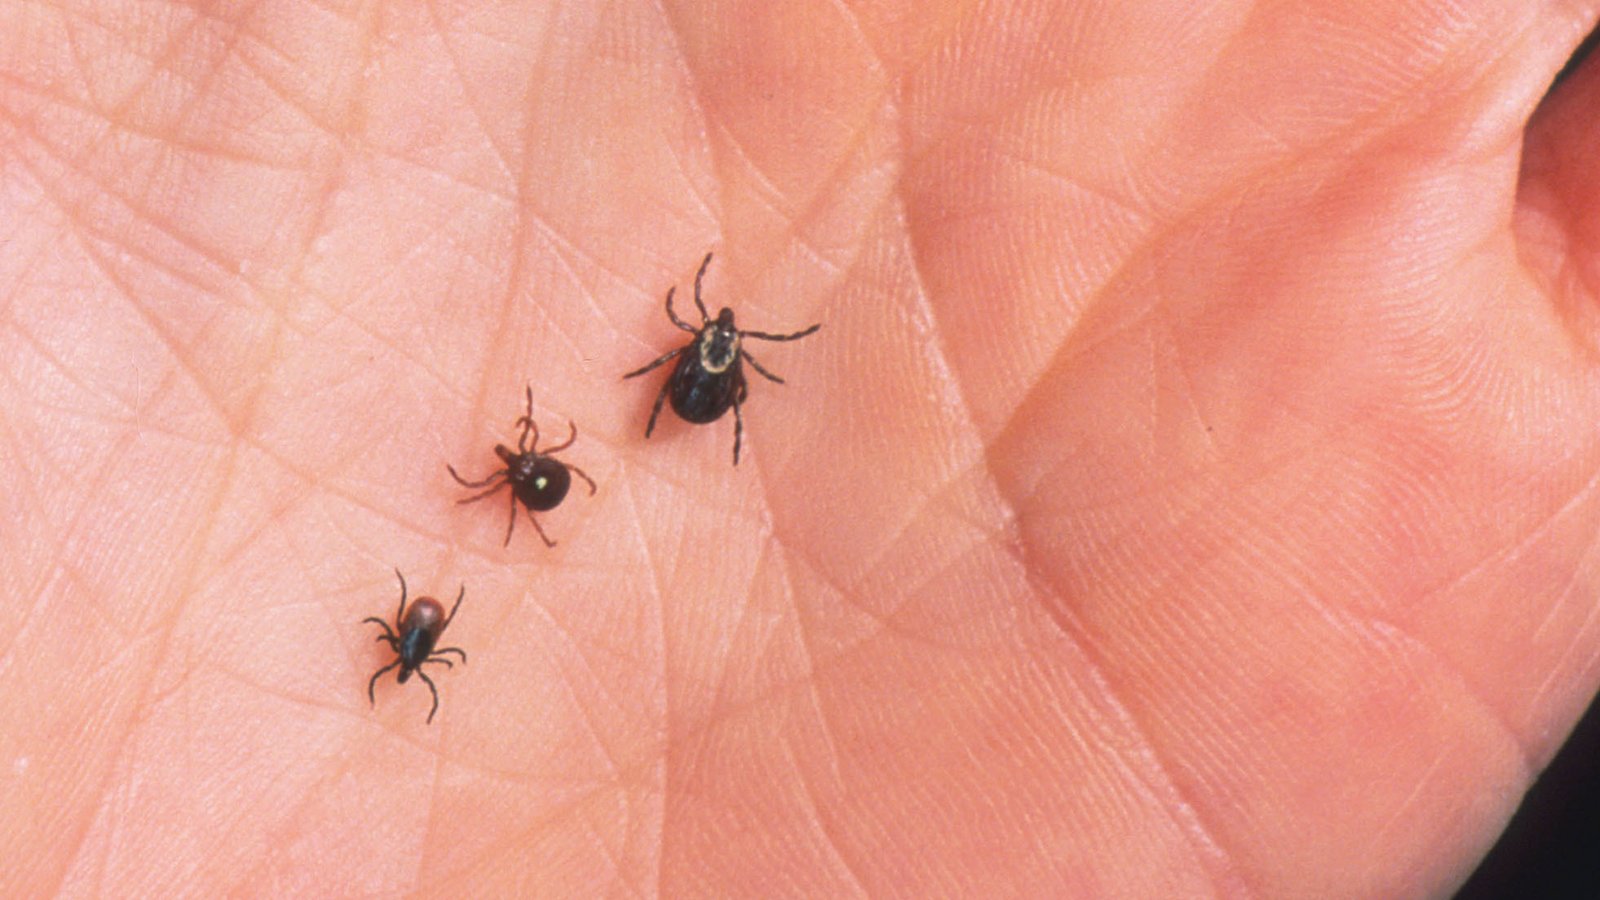 Lyme Disease: What To Eat And What To Avoid - A Complete Diet